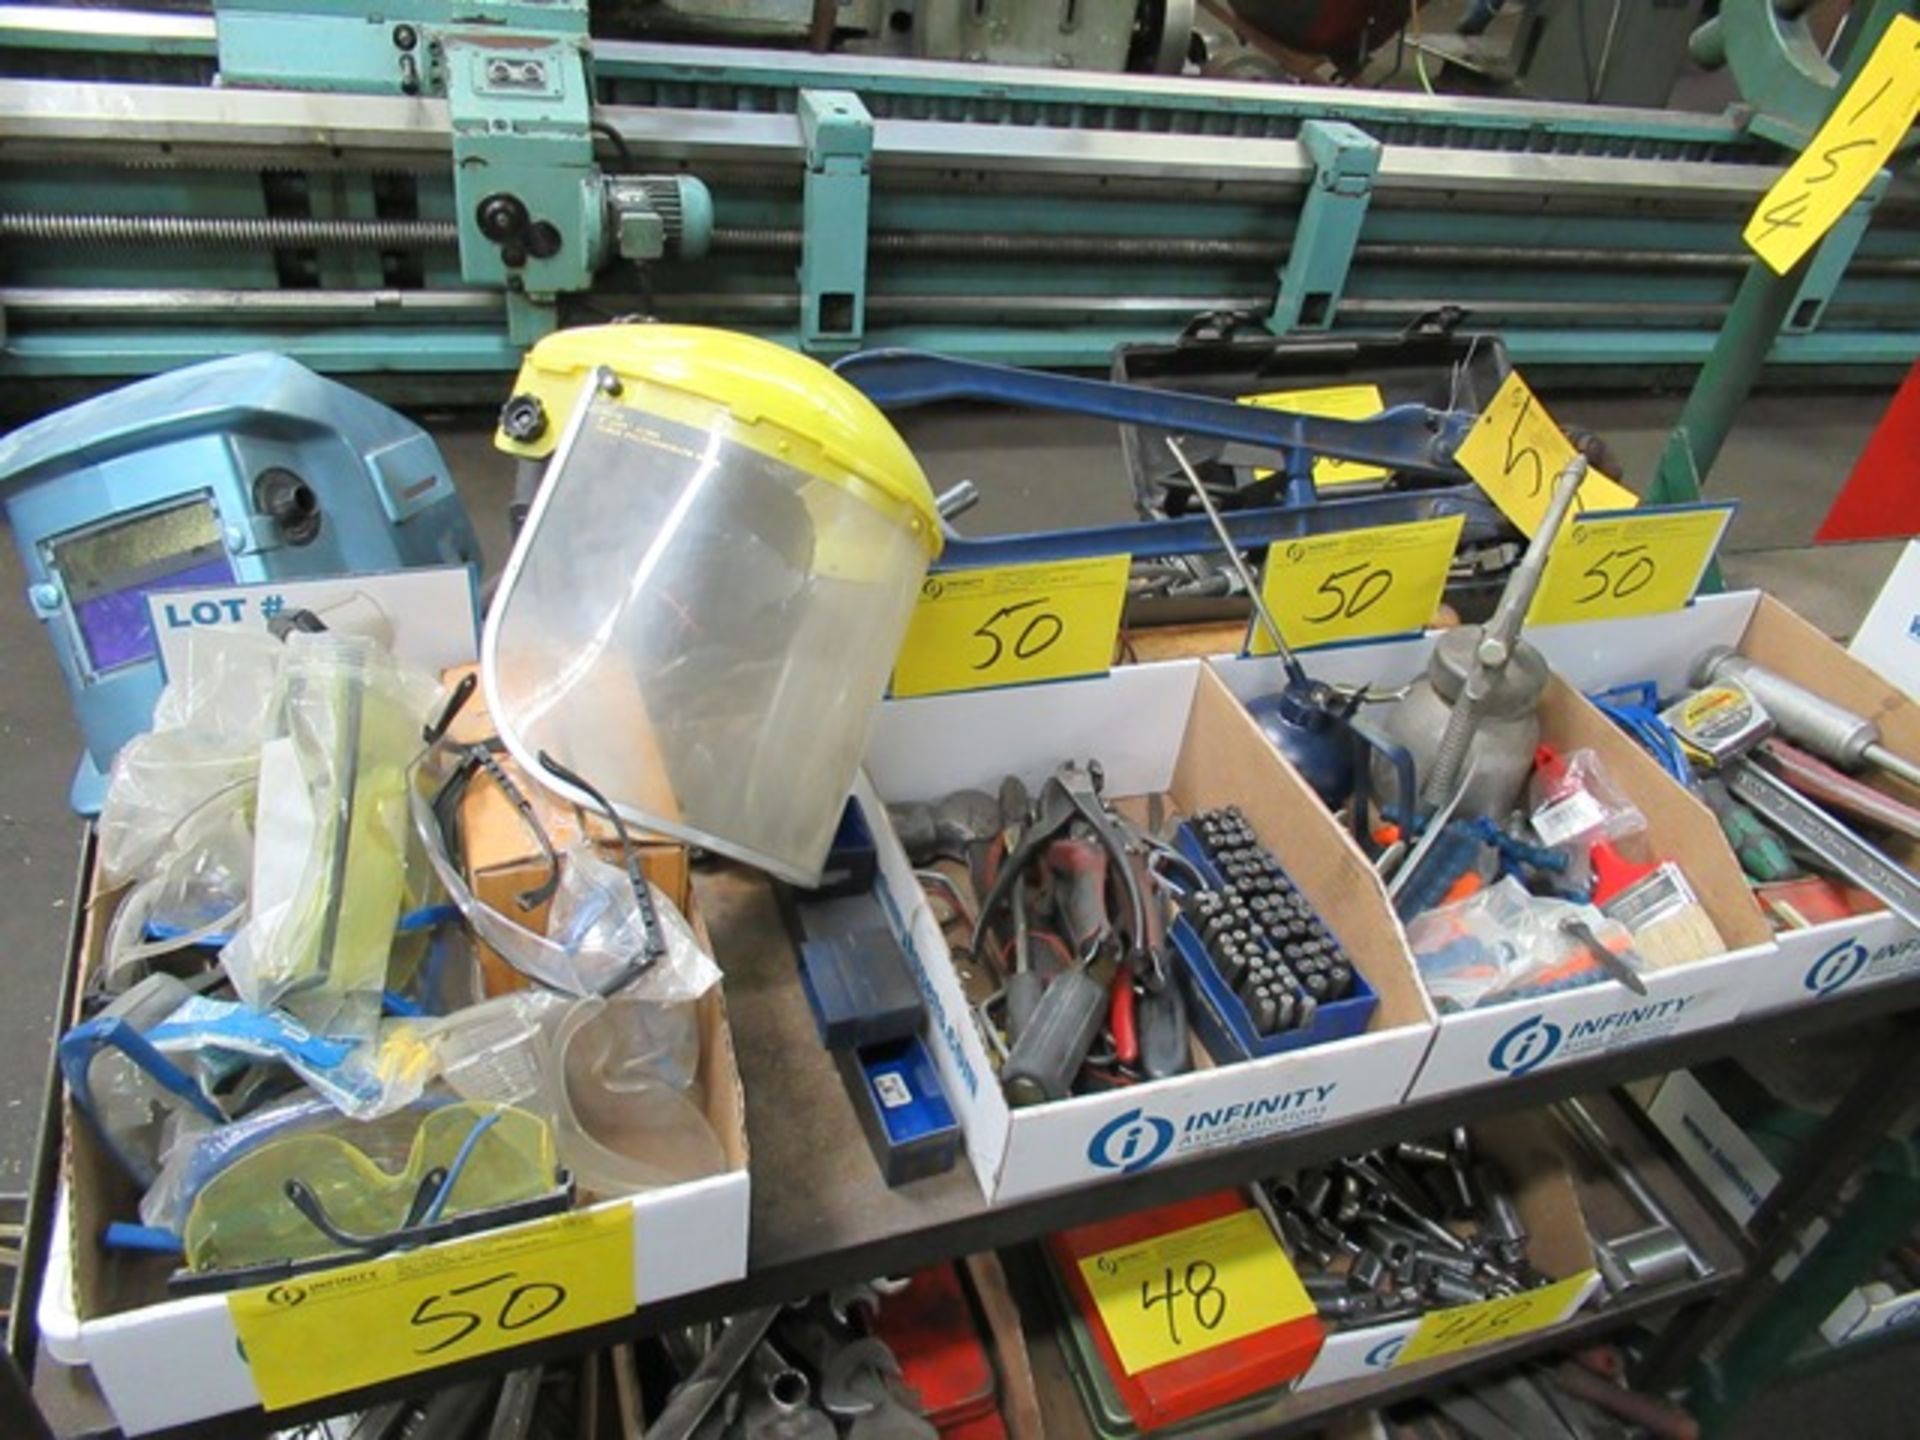 LOT ASST. SAFETY GLASSES, LETTER & NUMBER SETS, HAND TOOLS, W/ RECORD BOLT CUTTERS, PIPE WRENCH,